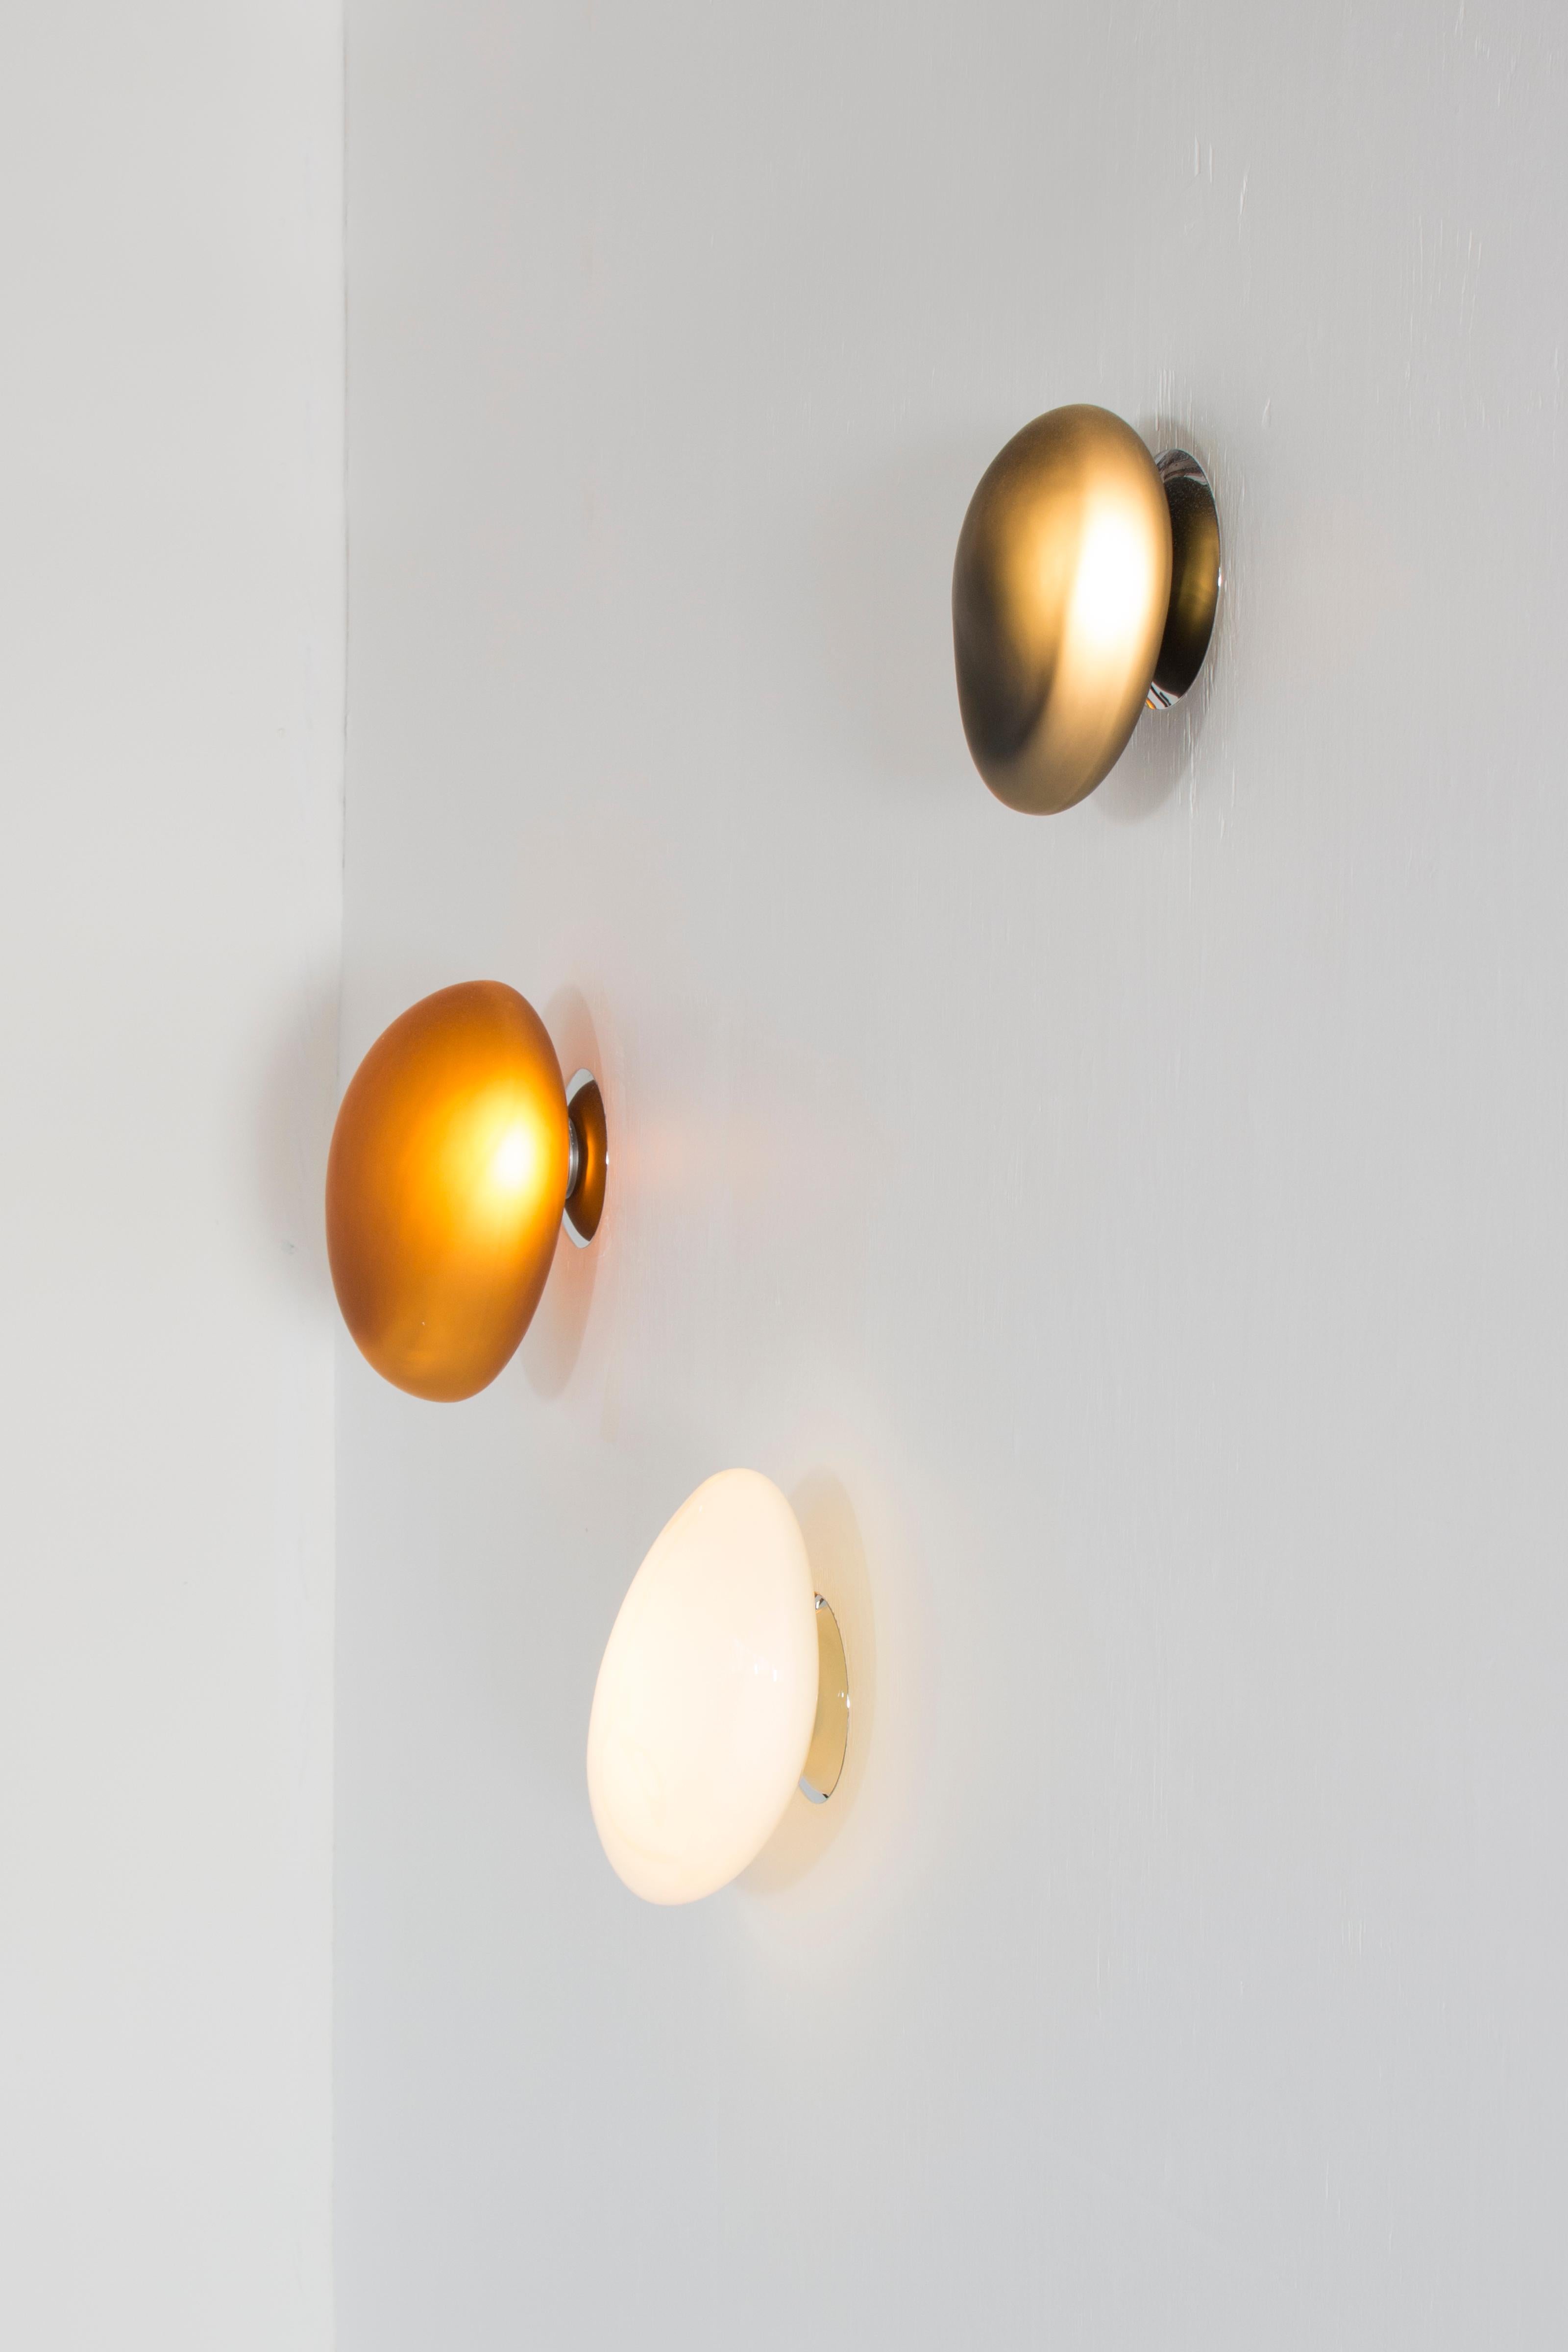 Contemporary Wall Lamp 'Pebble' by Andlight, Shape B, Citrine For Sale 1